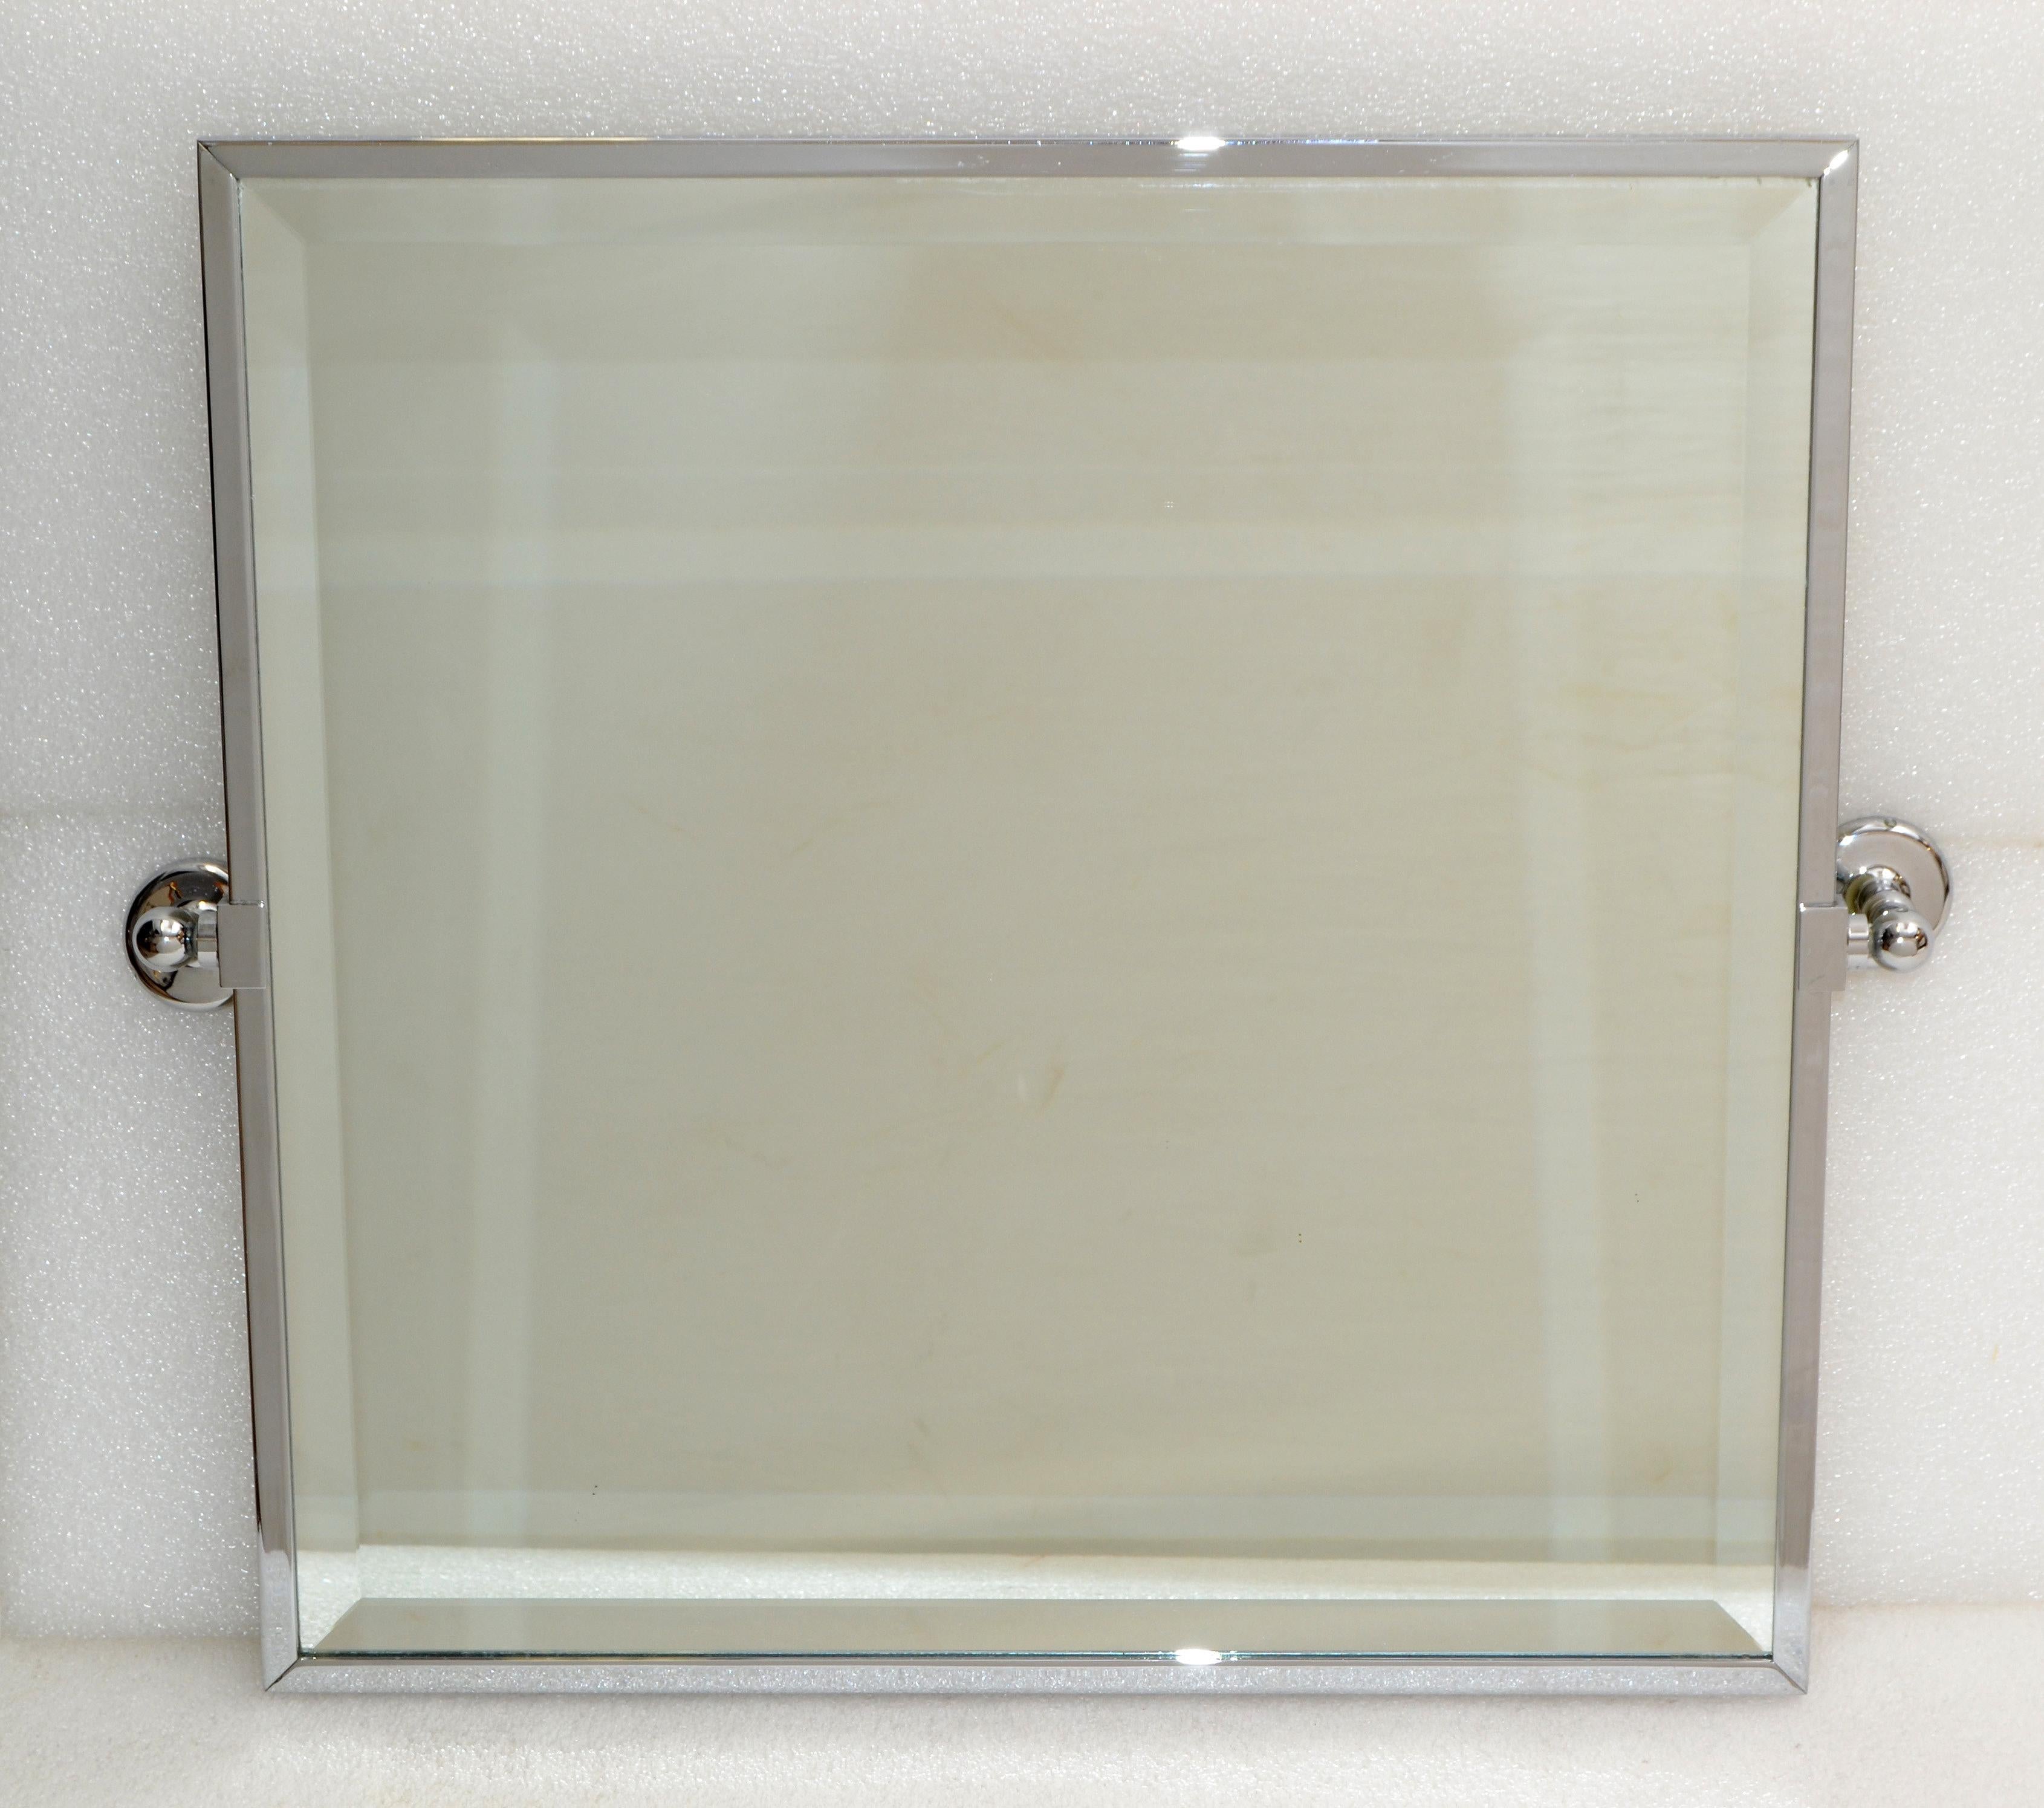 Beveled square mirror in the style of Jacques Adnet from the 1970s, in polished chrome.
Mirror measures: 20 x 20 inches.
The Mirror will be mounted to the wall.